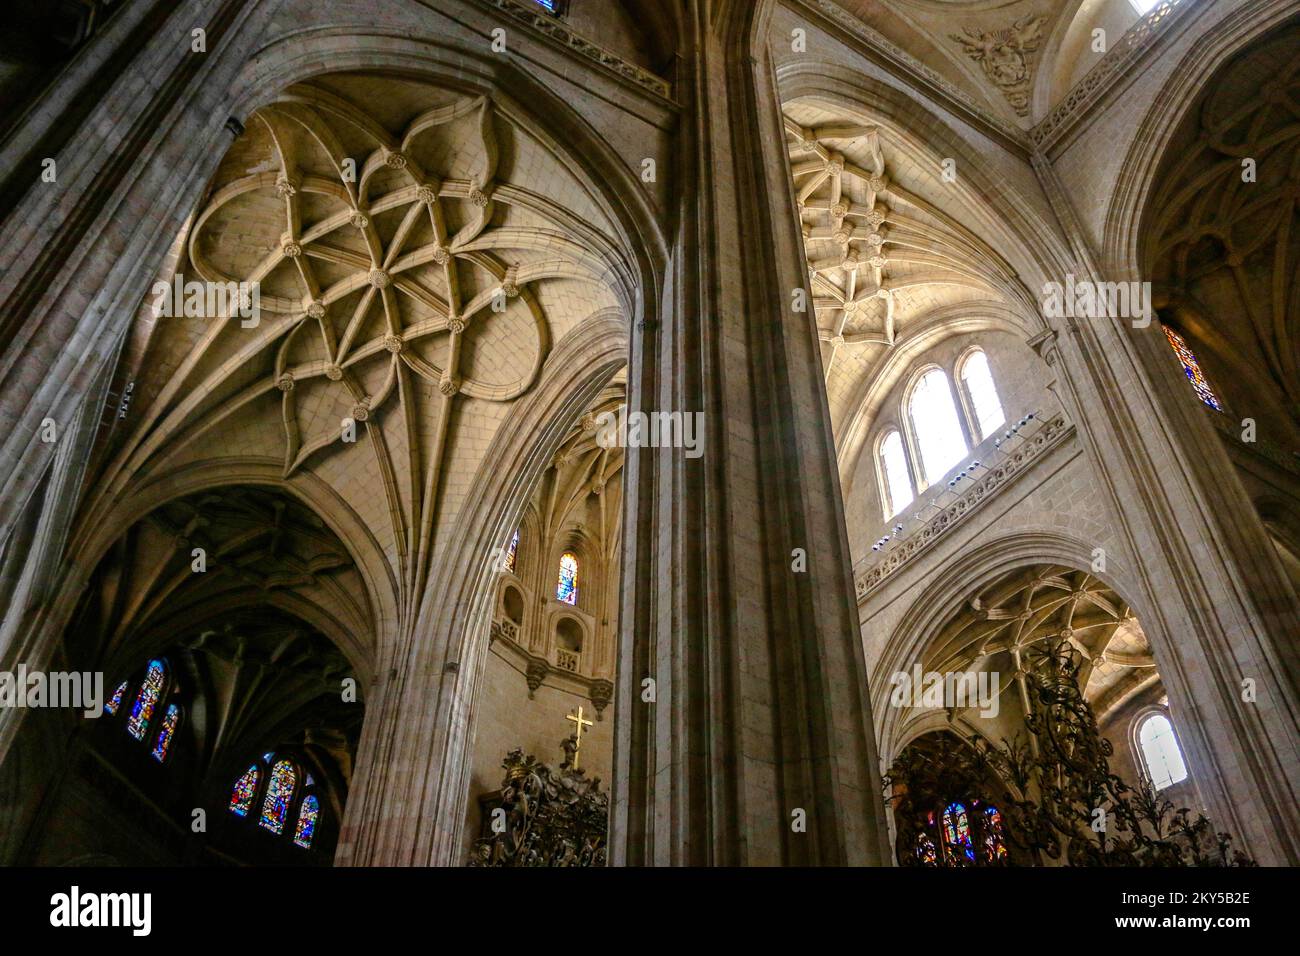 Interior of the Segovia Cathedral in Spain Stock Photo